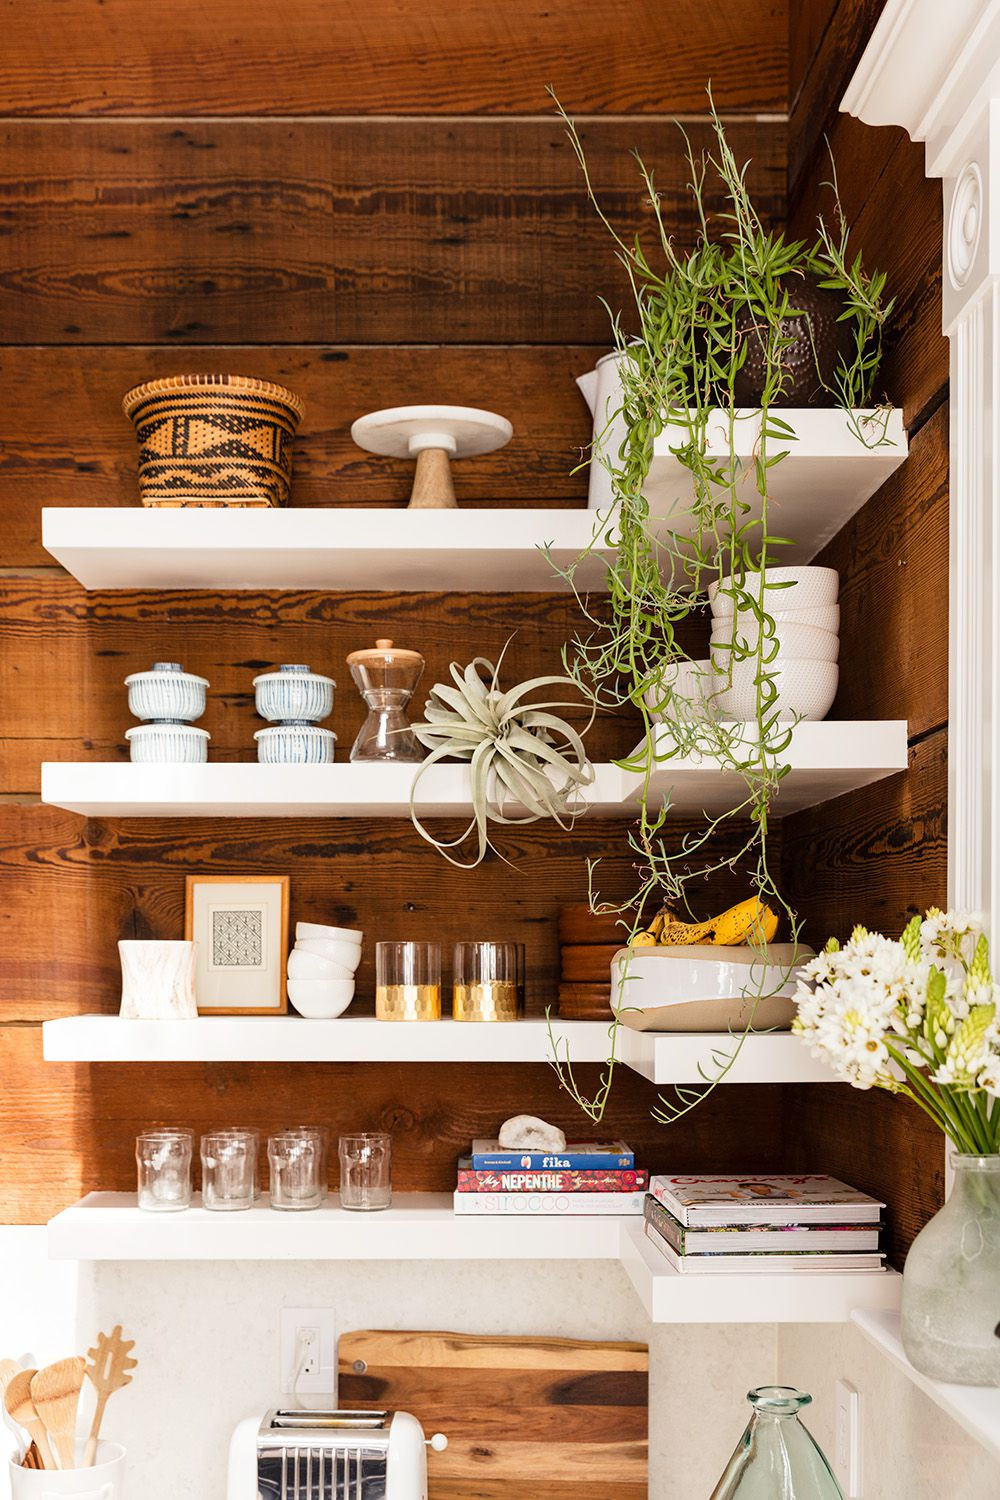 12 Open Kitchen Shelving Ideas That Will Update Your Space in Kitchen Shelf Design